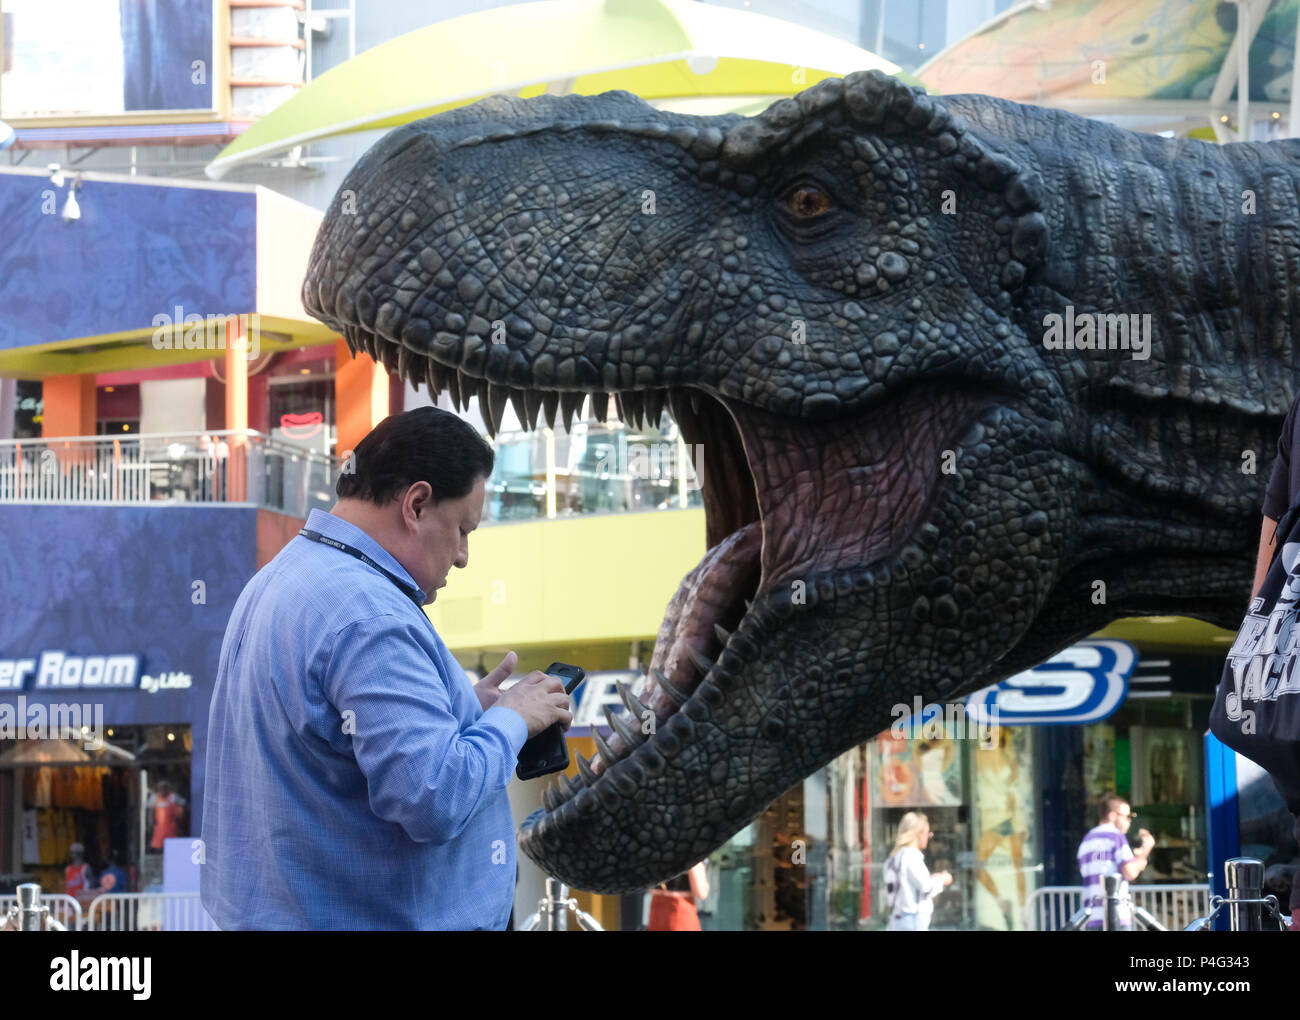 Los Angeles, USA. 21st June, 2018. A man passes by a giant Tyrannosaurus rex statue at Universal CityWalk in Los Angeles, the United States, on June 21, 2018. For the promotion of the screening of the new film 'Jurassic World: Fallen Kingdom' on Universal Cinema Theatres, a colossal 3-ton Tyrannosaurus rex, a life-sized Gyrosphere original movie prop, as well as original costume, are displayed for public at Universal CityWalk. Credit: Zhao Hanrong/Xinhua/Alamy Live News Stock Photo